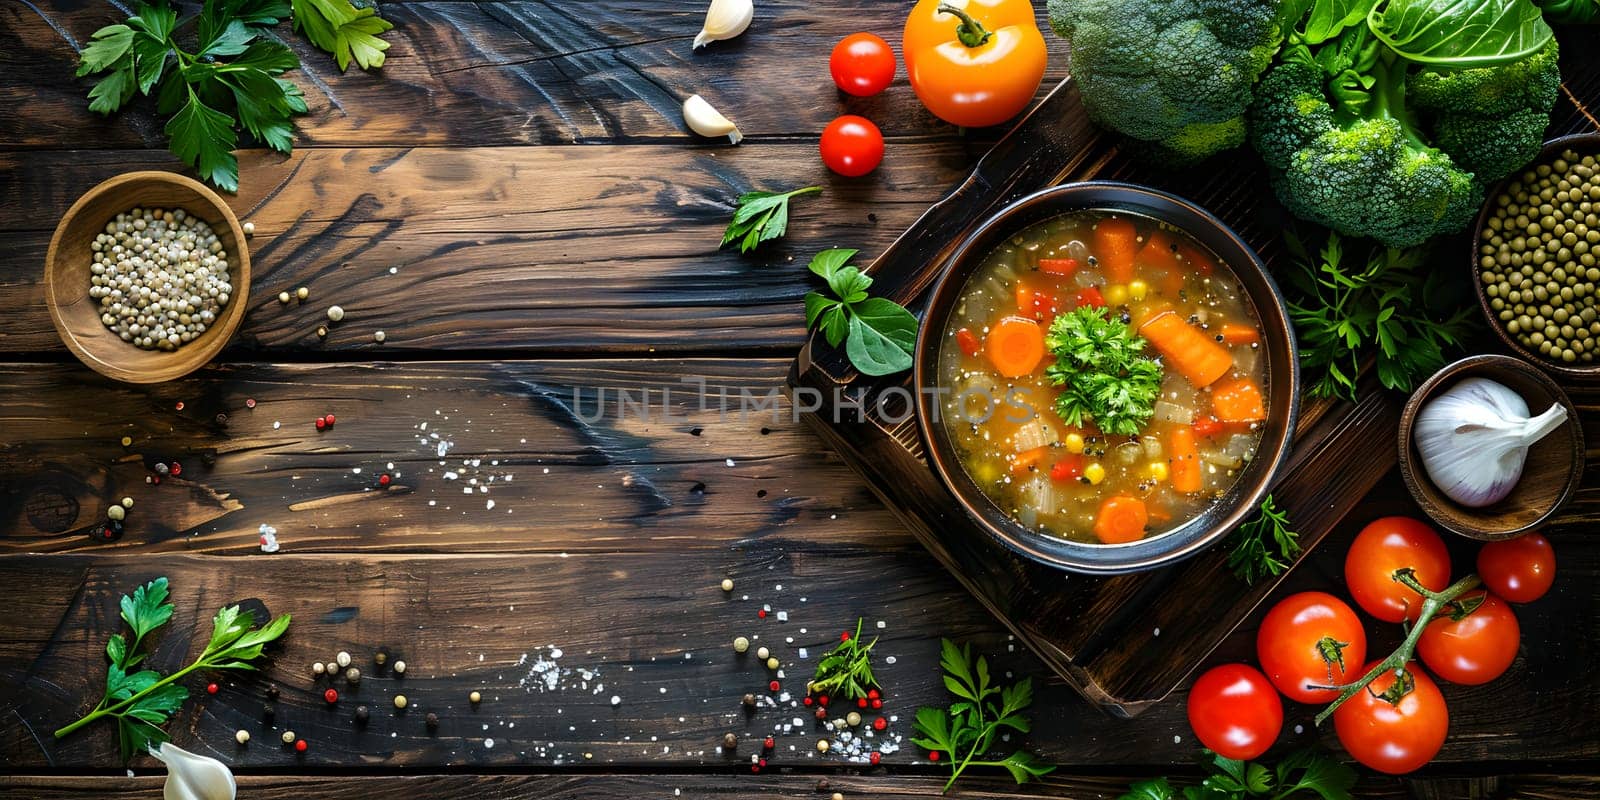 A delicious bowl of soup made with plum tomatoes and surrounded by a variety of fresh vegetables on a rustic wooden table